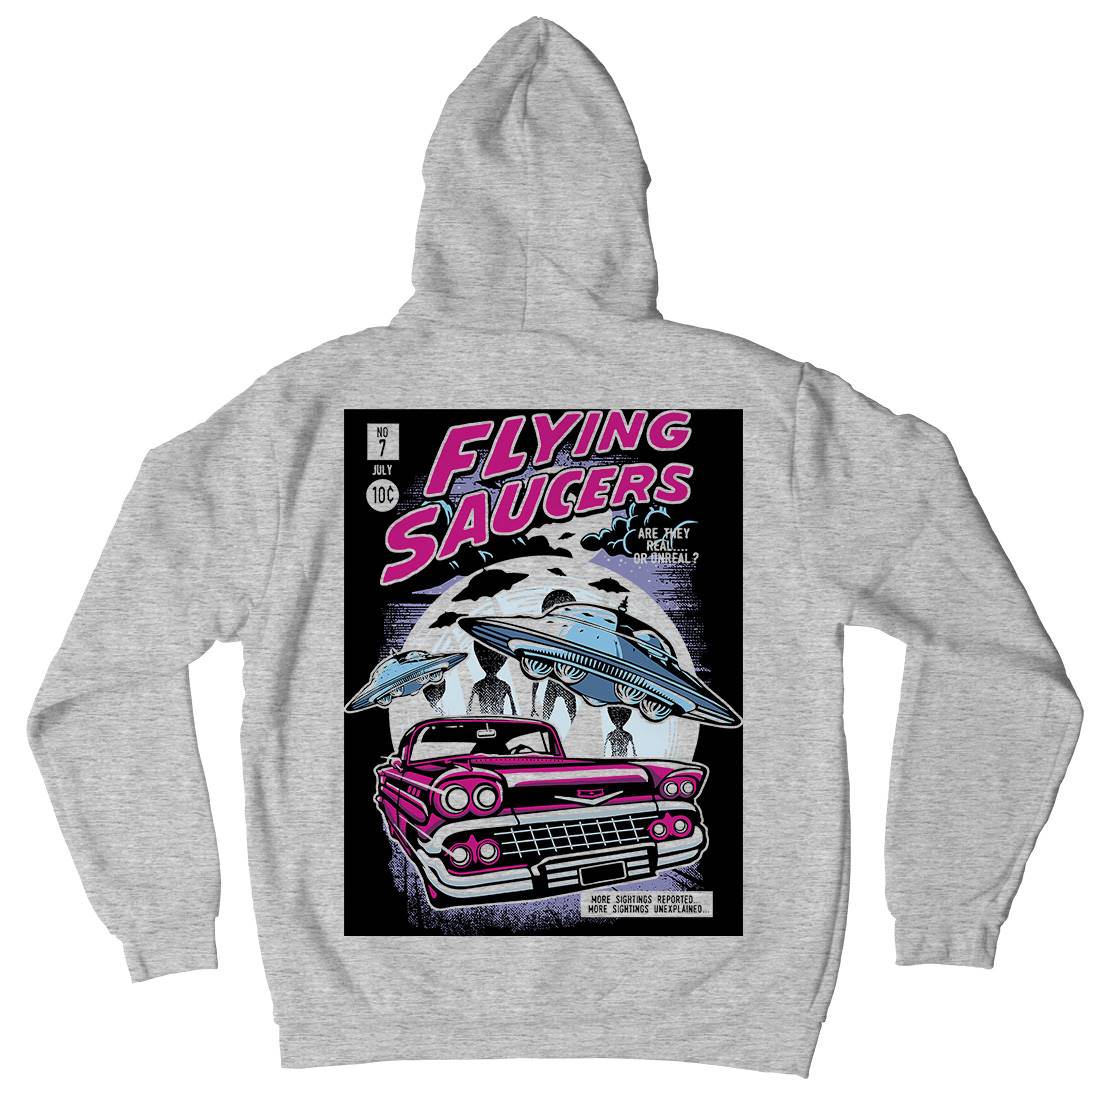 Flying Saucers Kids Crew Neck Hoodie Space A531